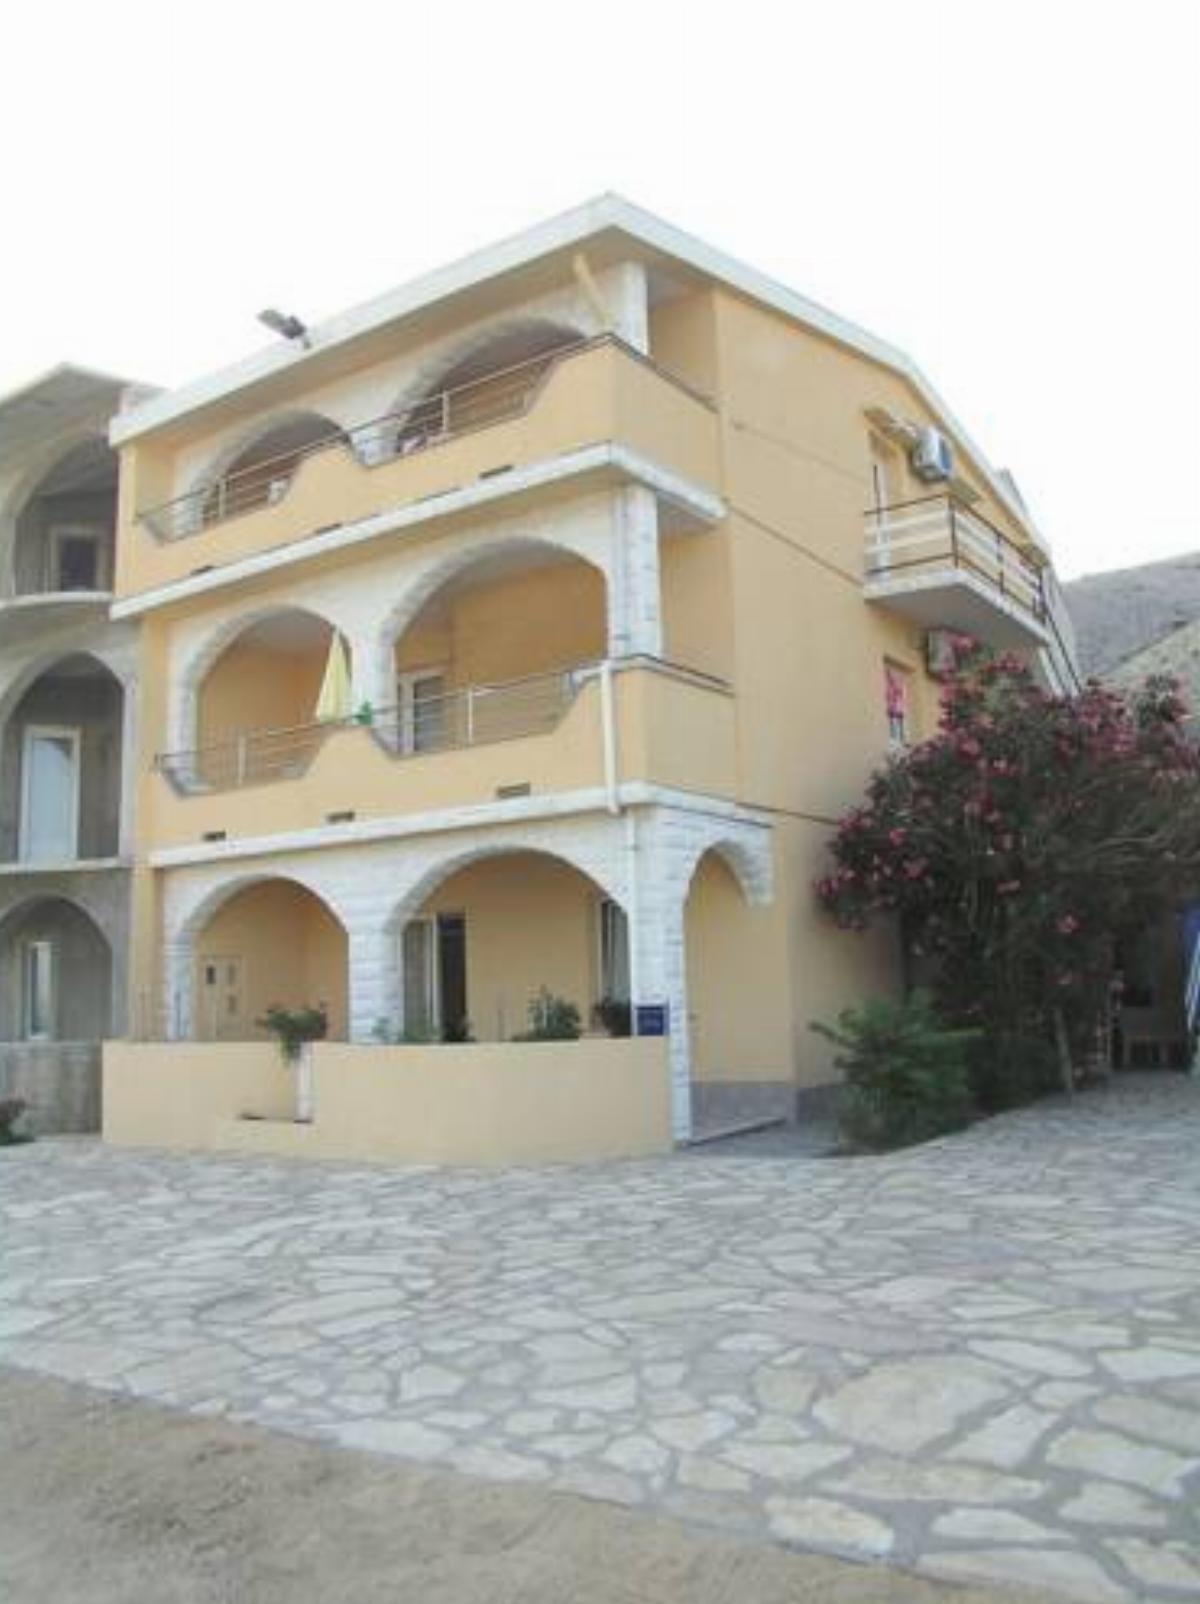 Apartment in Pag with One-Bedroom 21 Hotel Pag Croatia